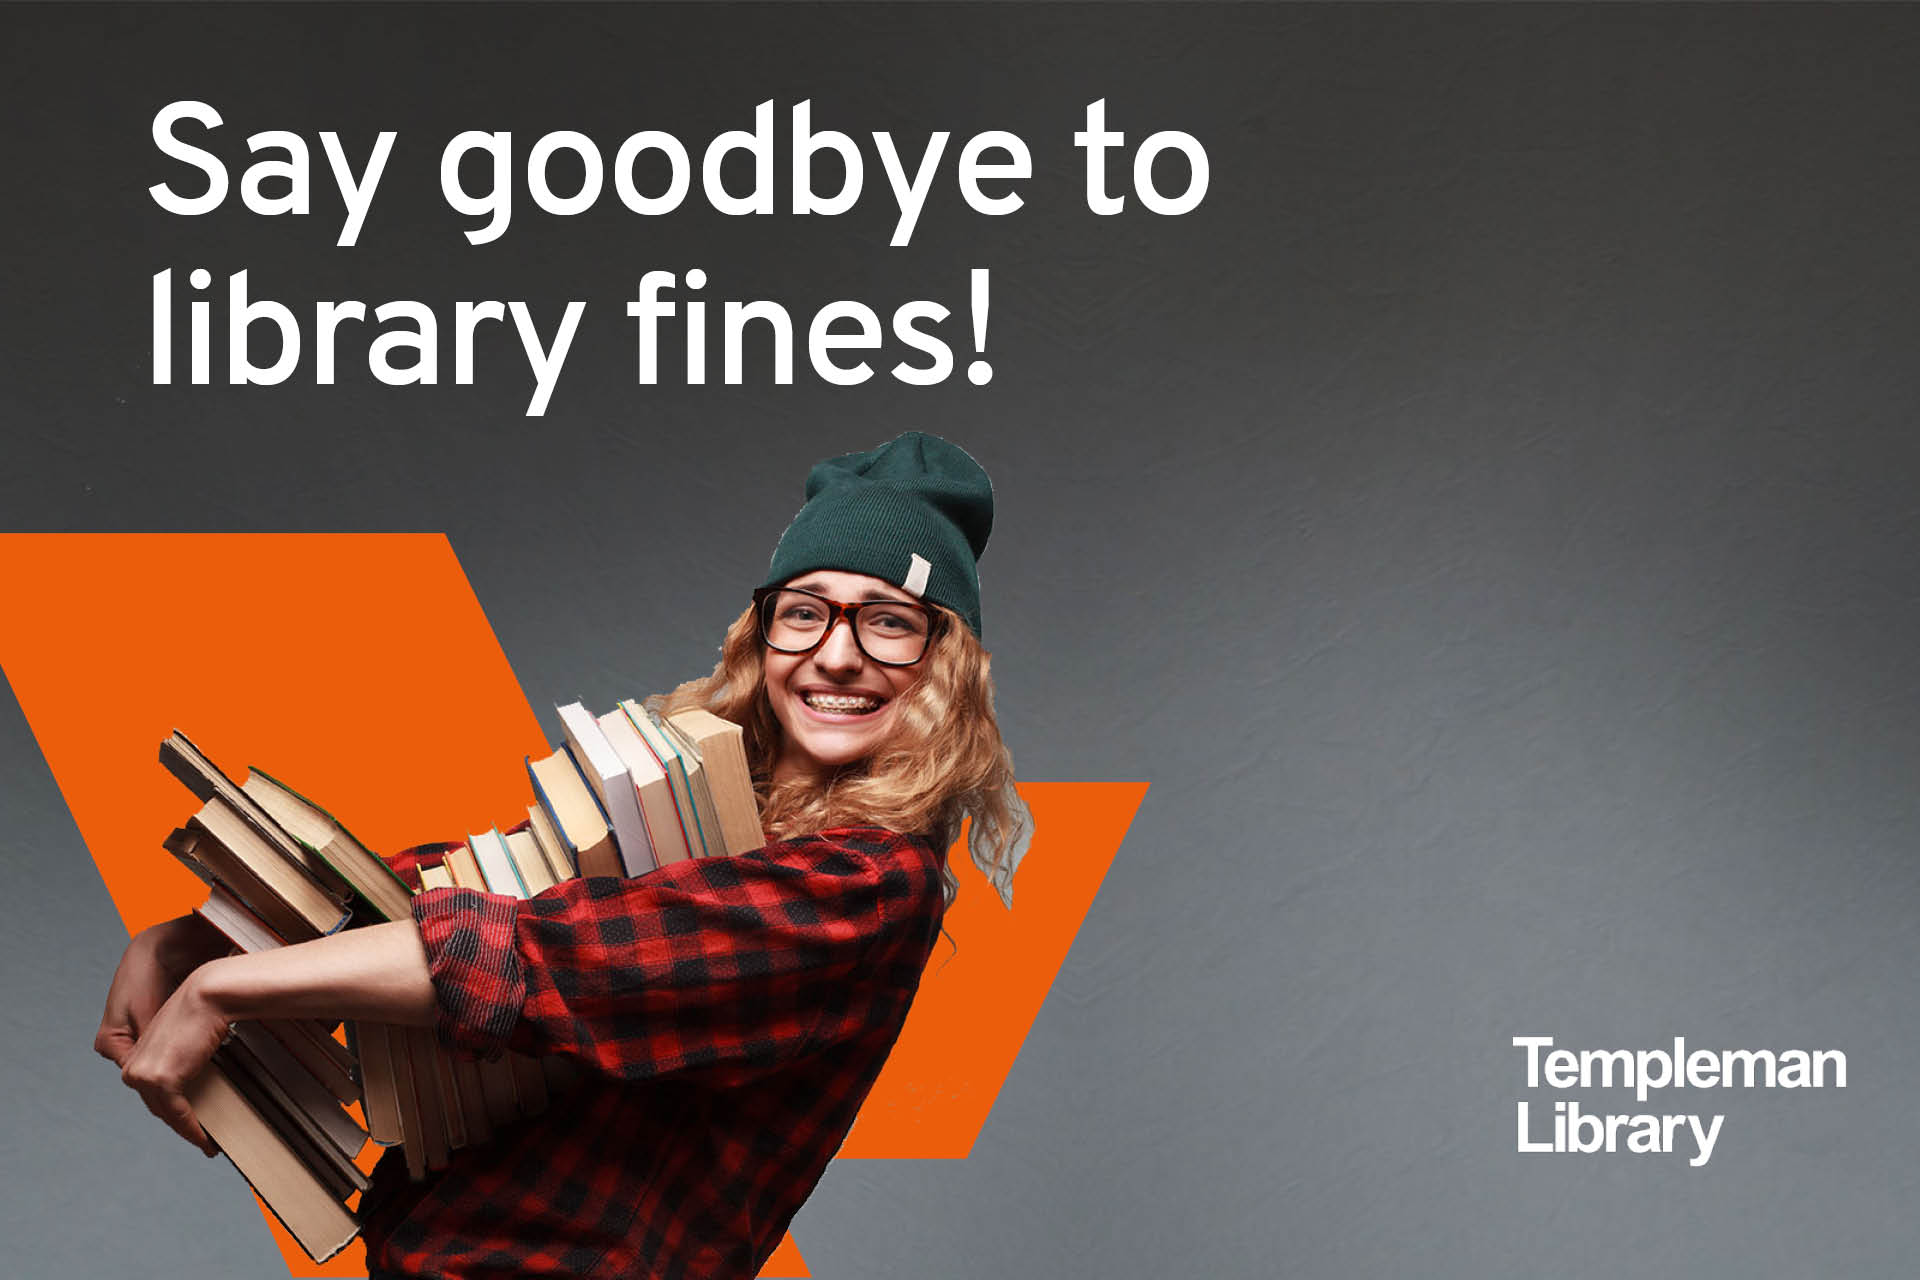 Say goodbye to library fines! Student holding pile of books